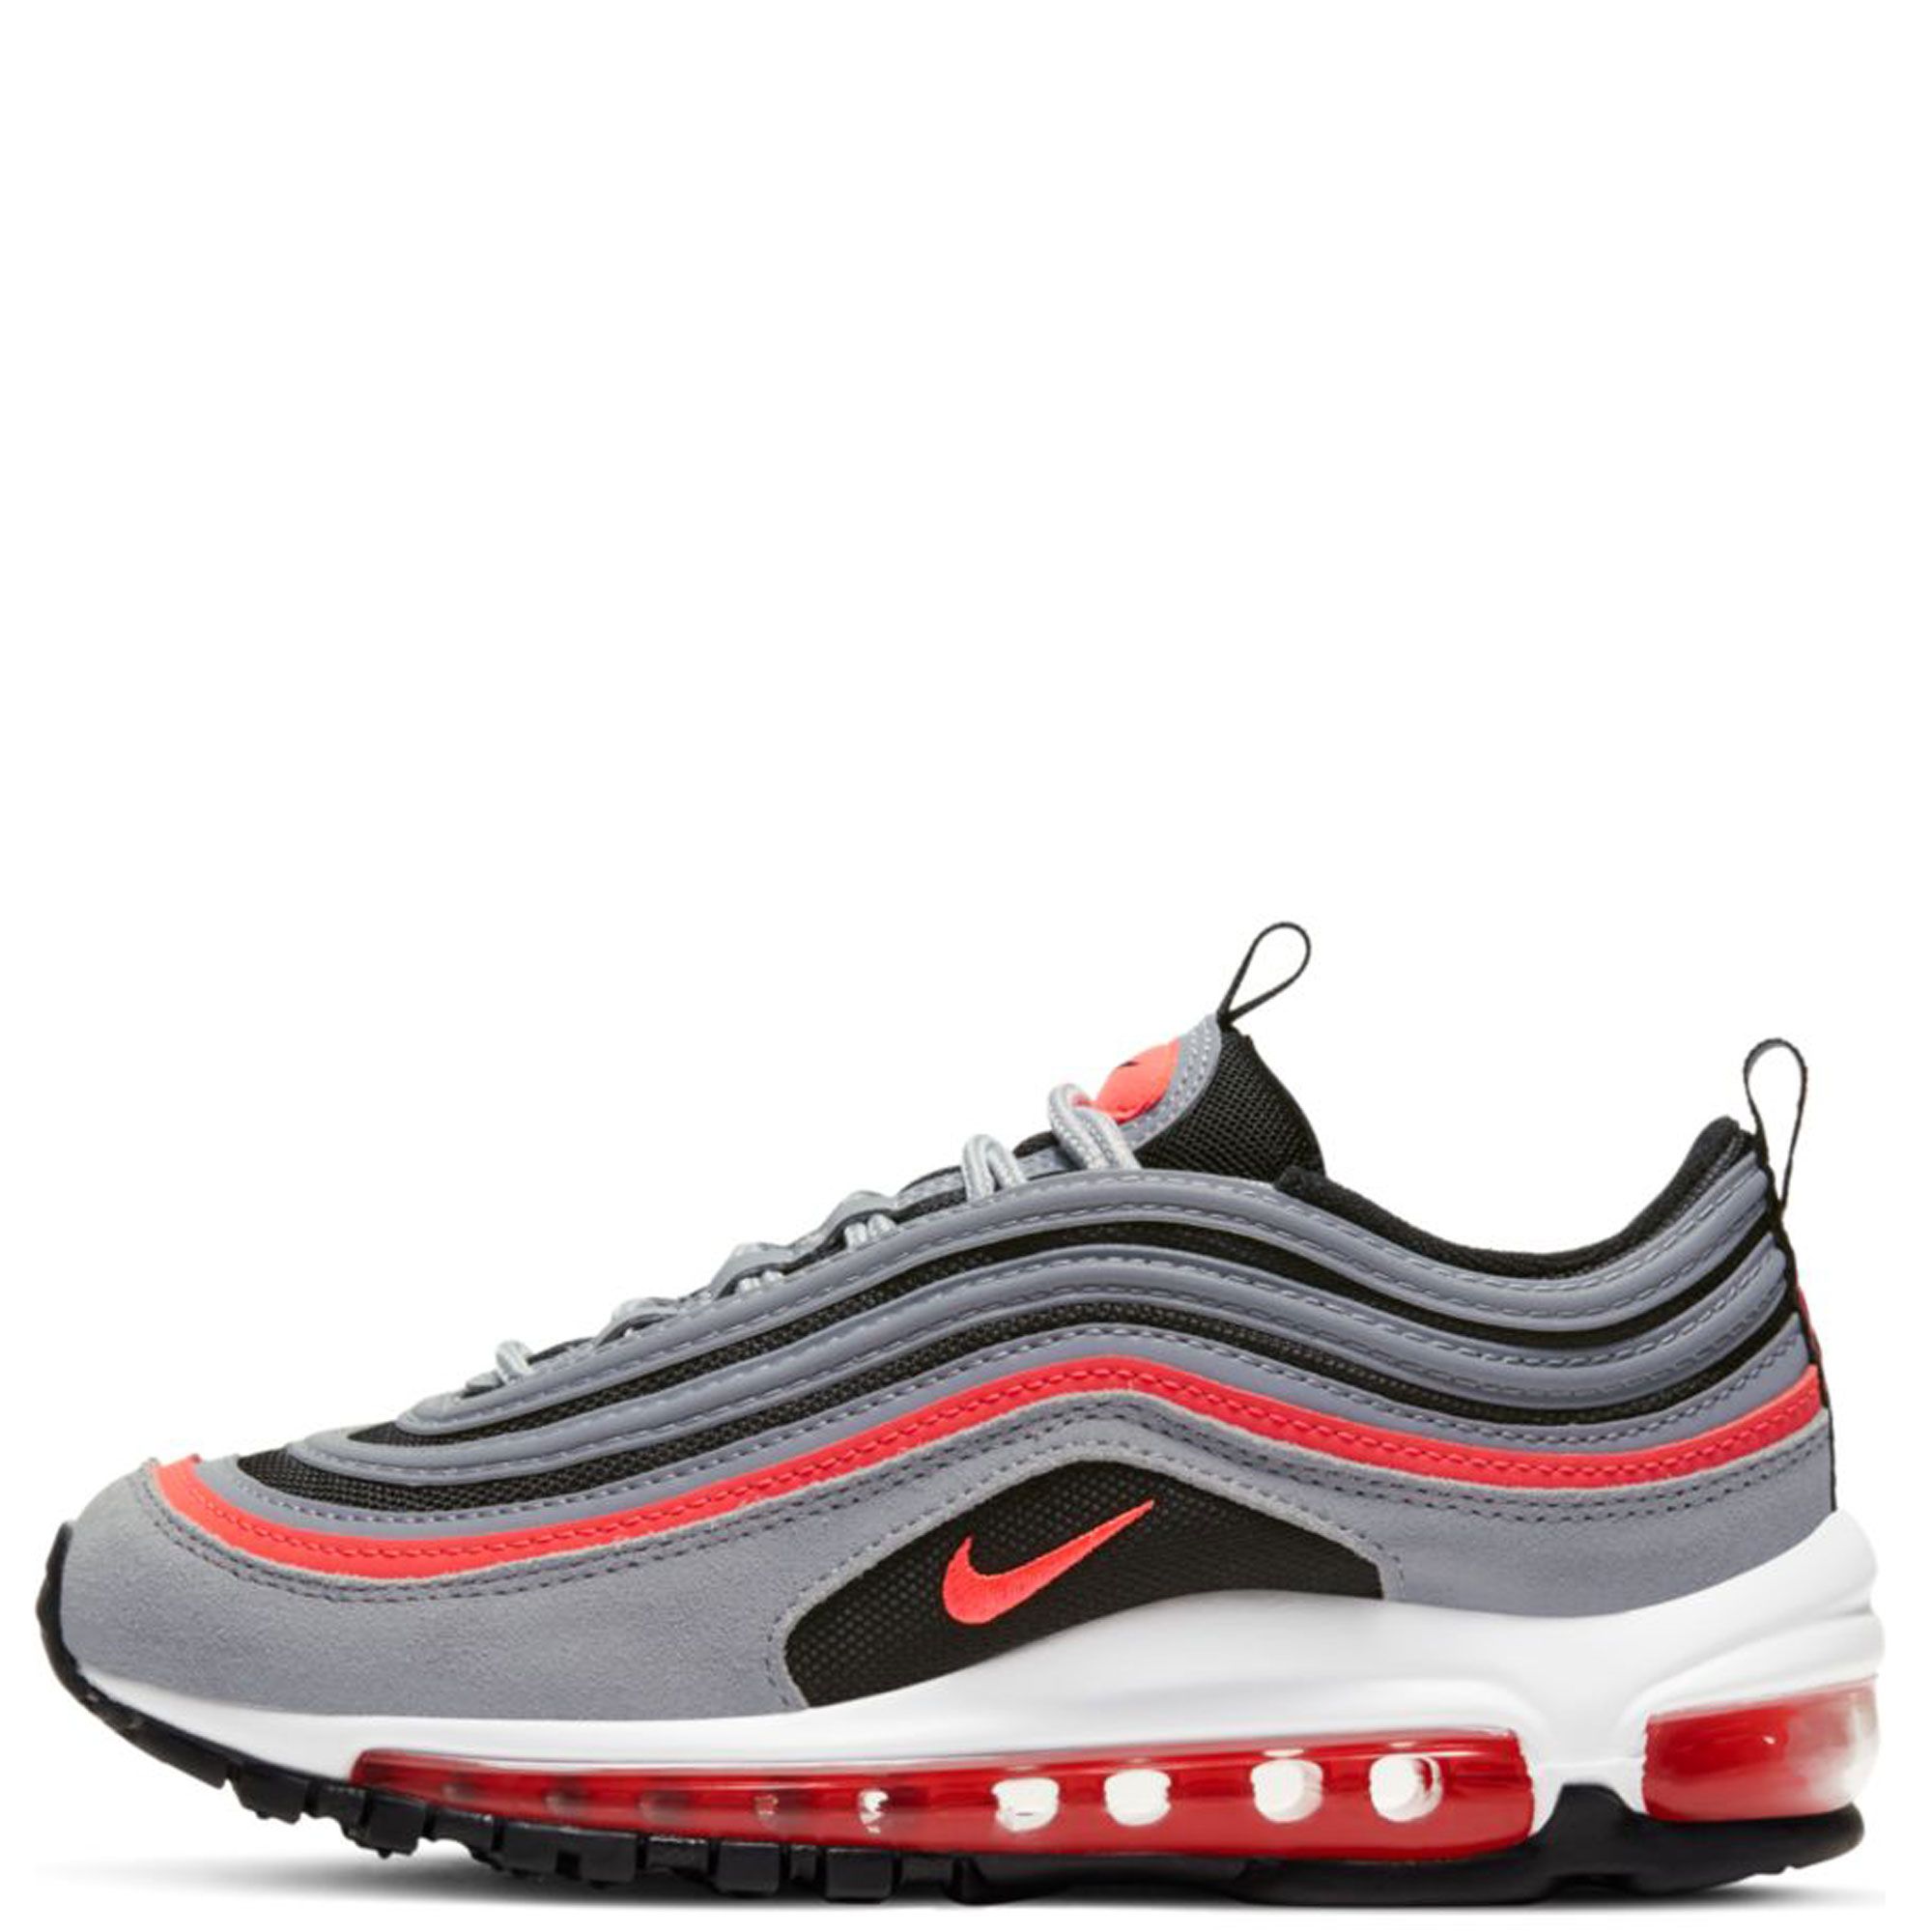 air max 97 red black and white